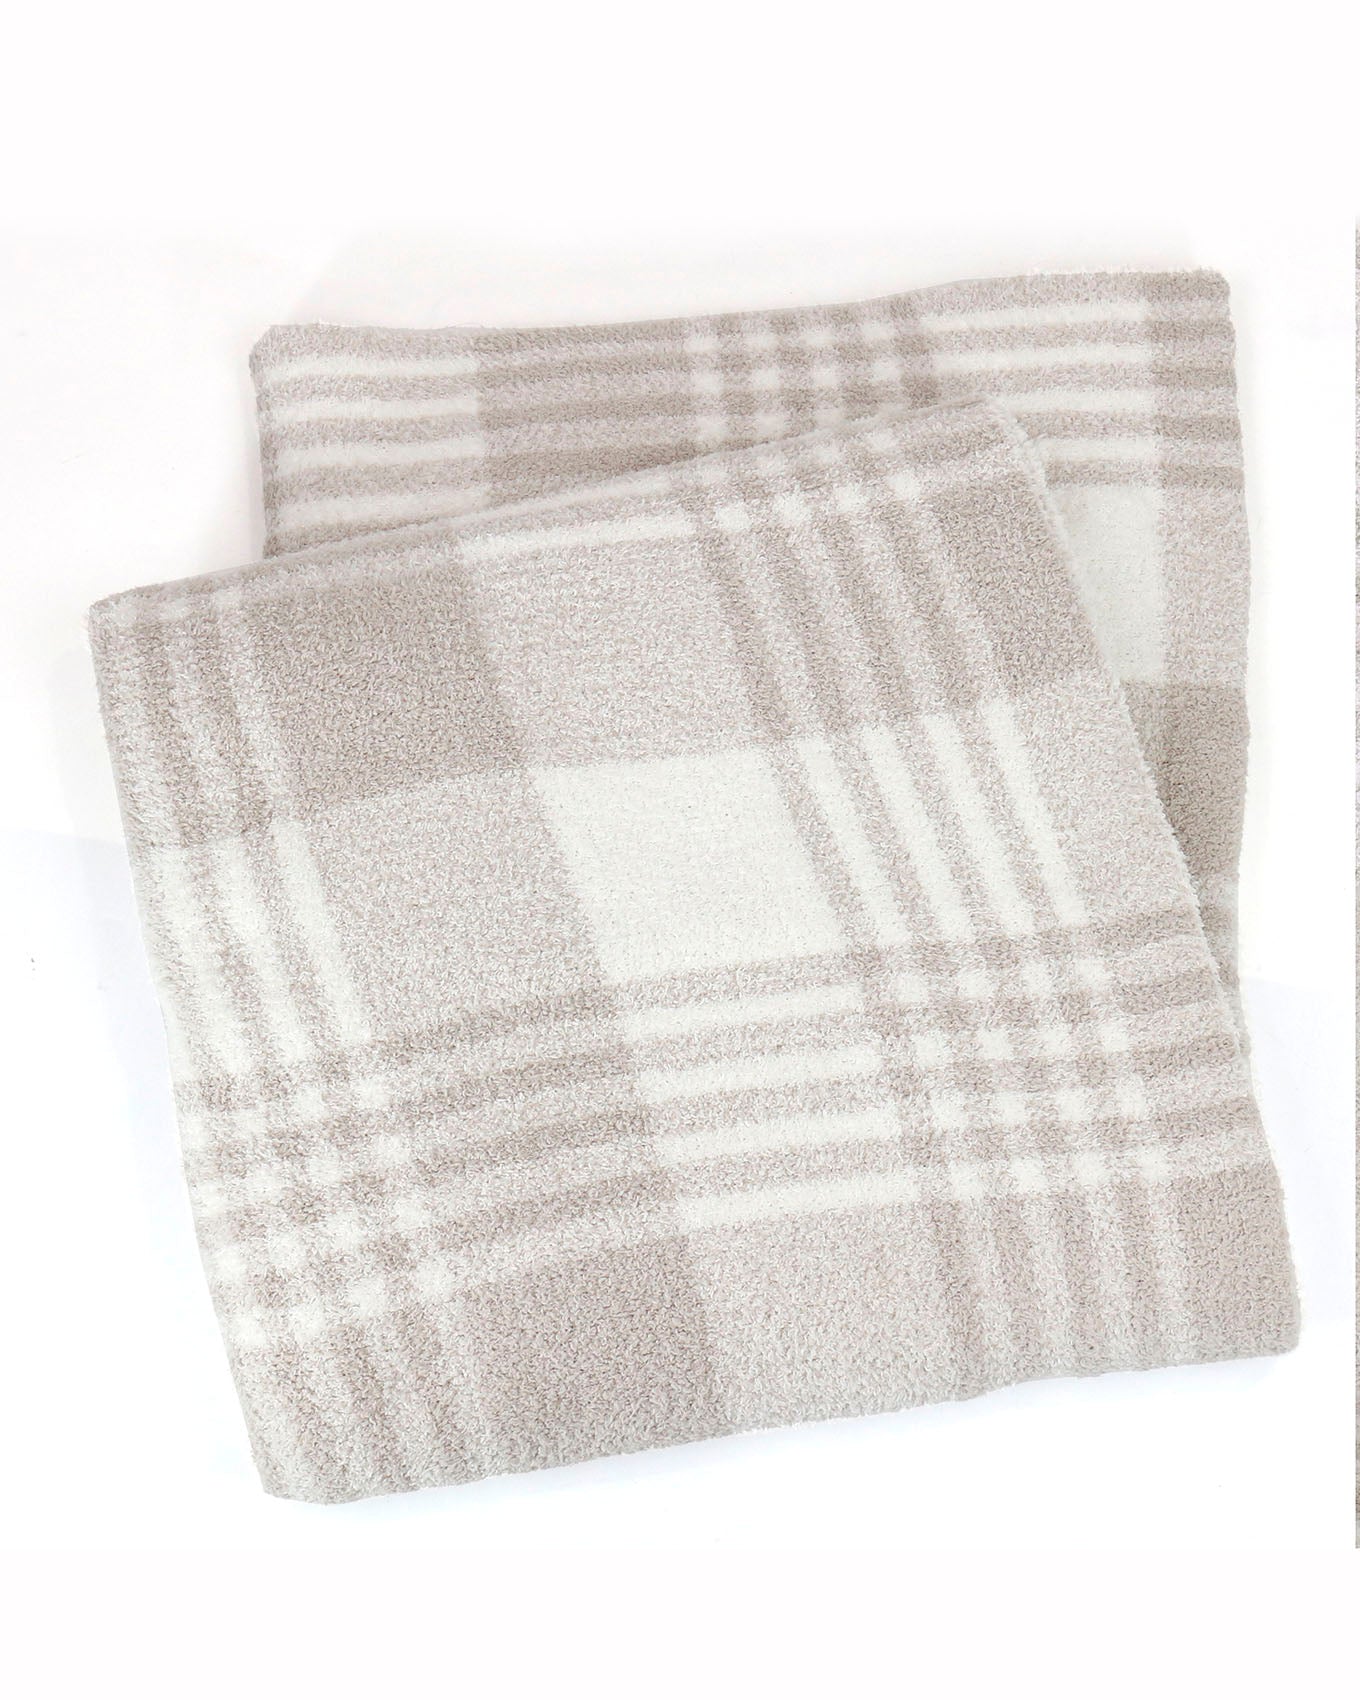 stock shot view of neutral plaid blanket